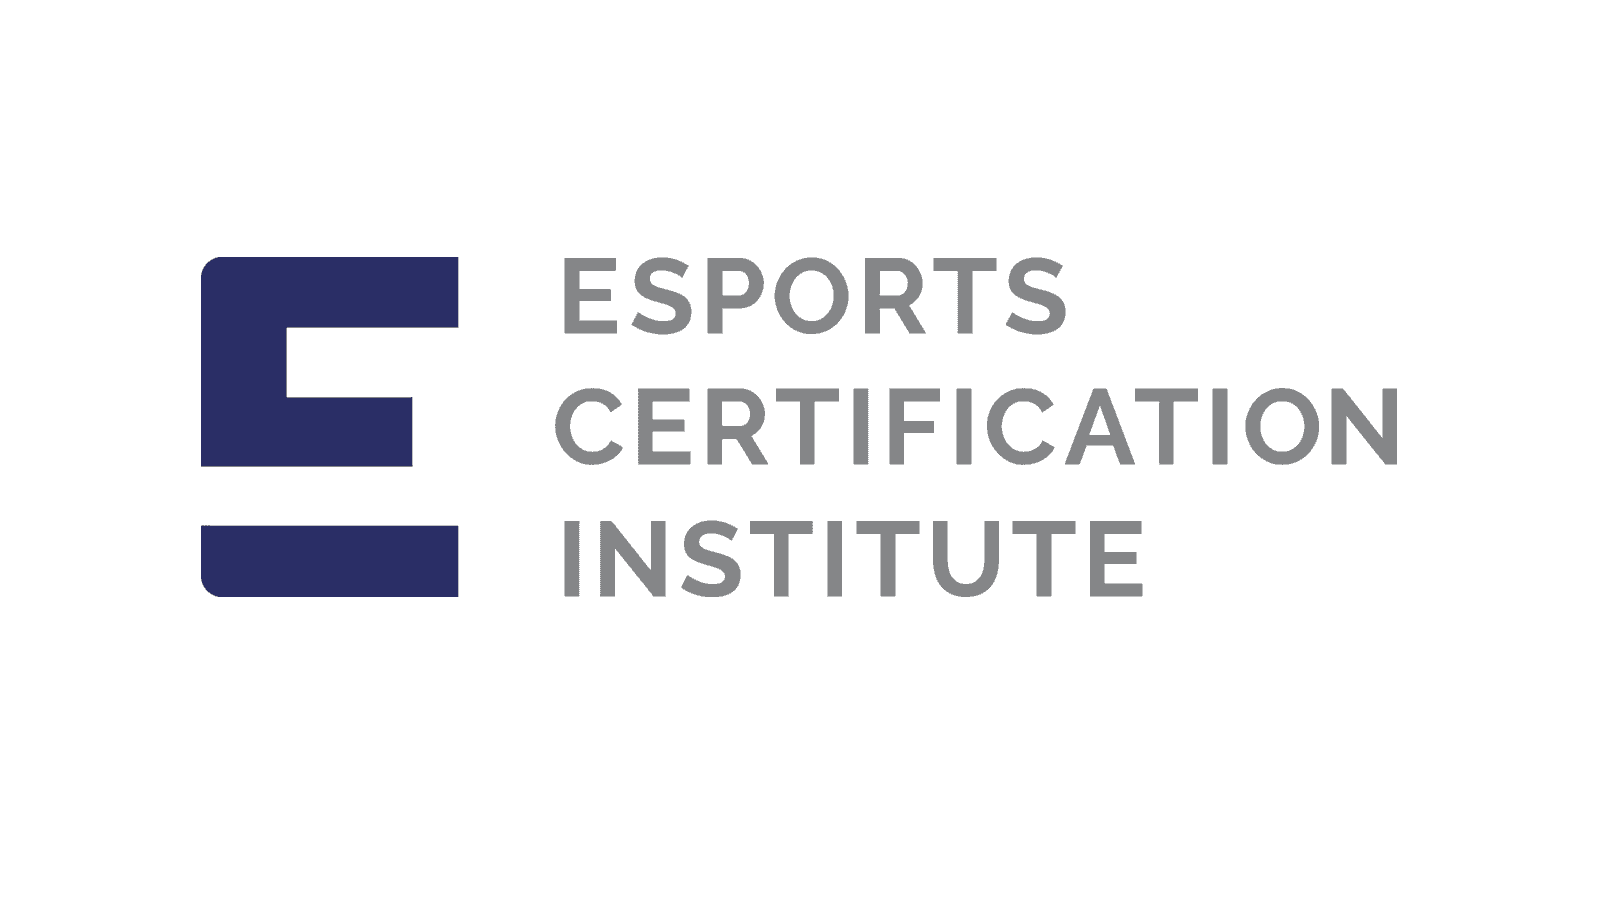 New Company Created By Gaming Veterans To Improve Esports Hiring Using Certification